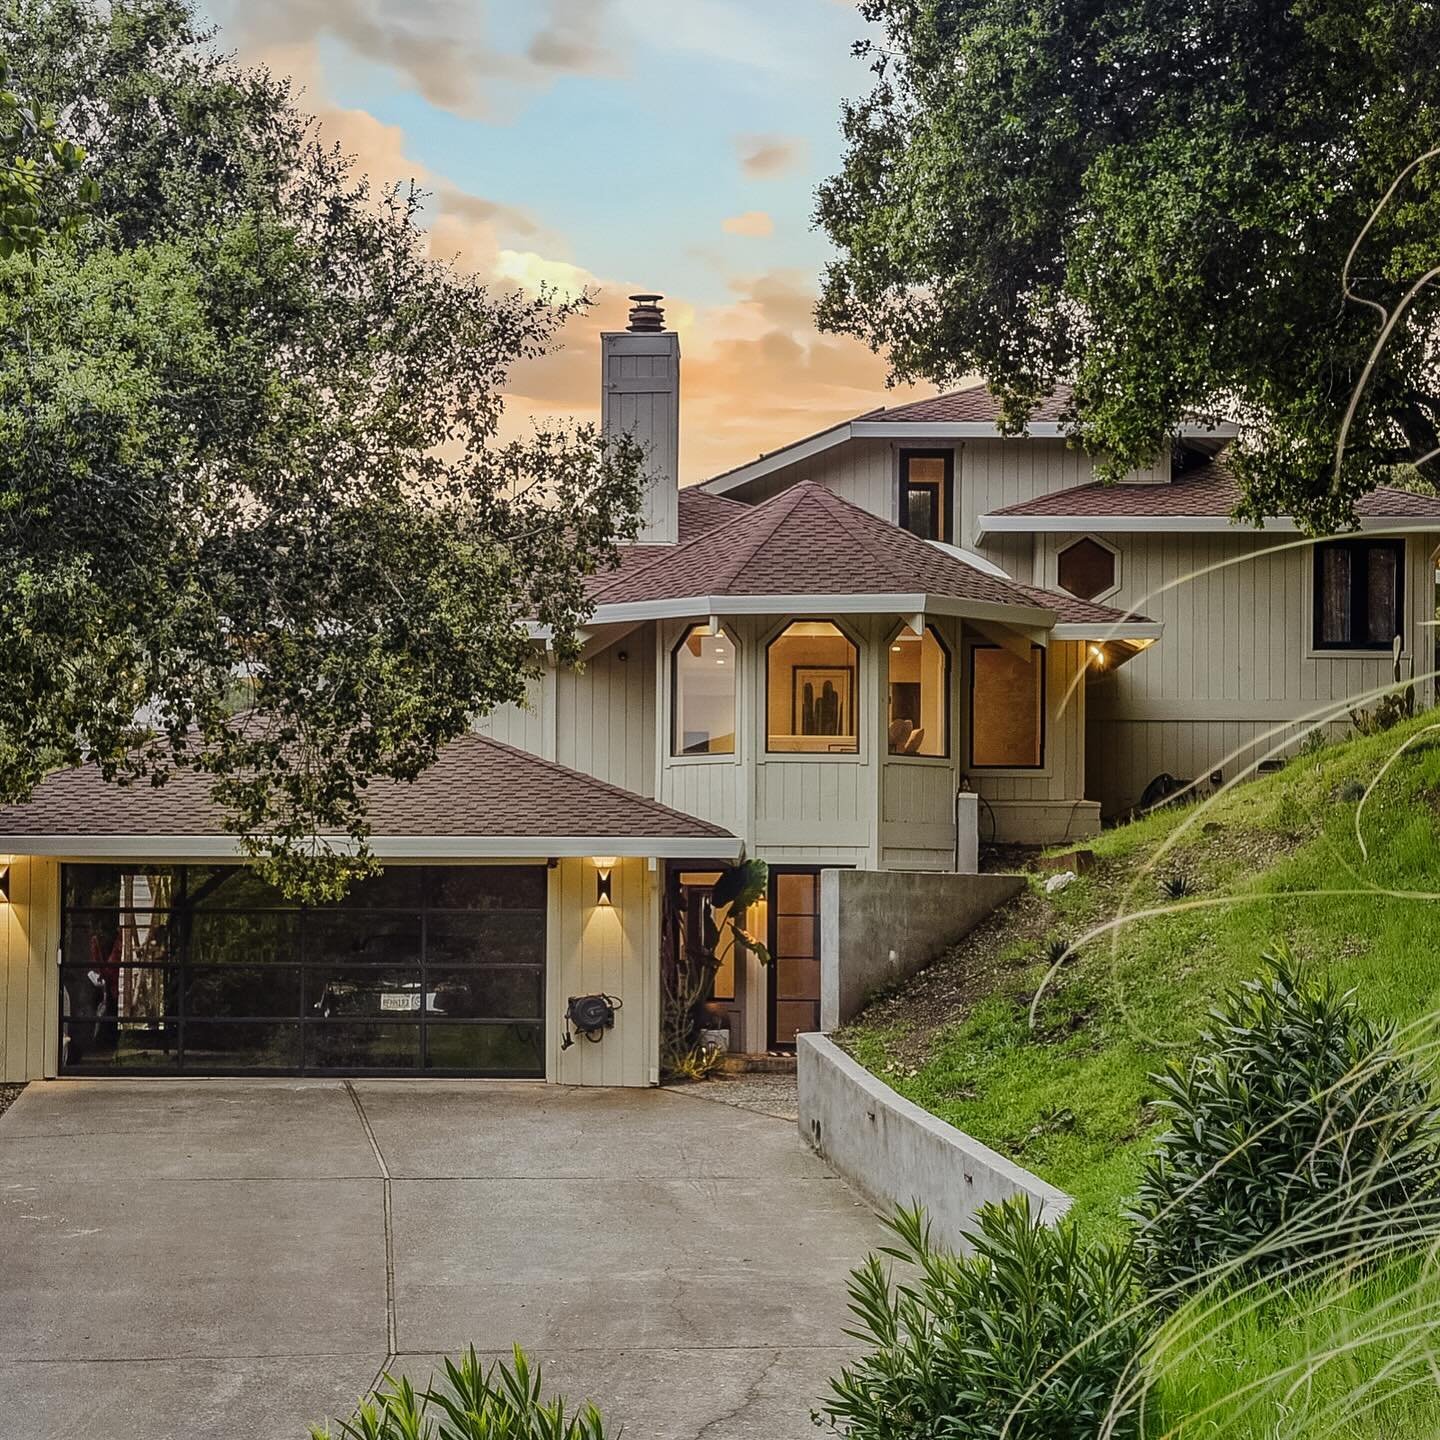 Off-Market Opportunity! Nestled on 2 acres of picturesque land in Novato, 200 Pacheco Avenue offers an unparalleled blend of luxury, functionality, and eco-conscious living.

$2.095M
200Pacheco.com
@mdmilano